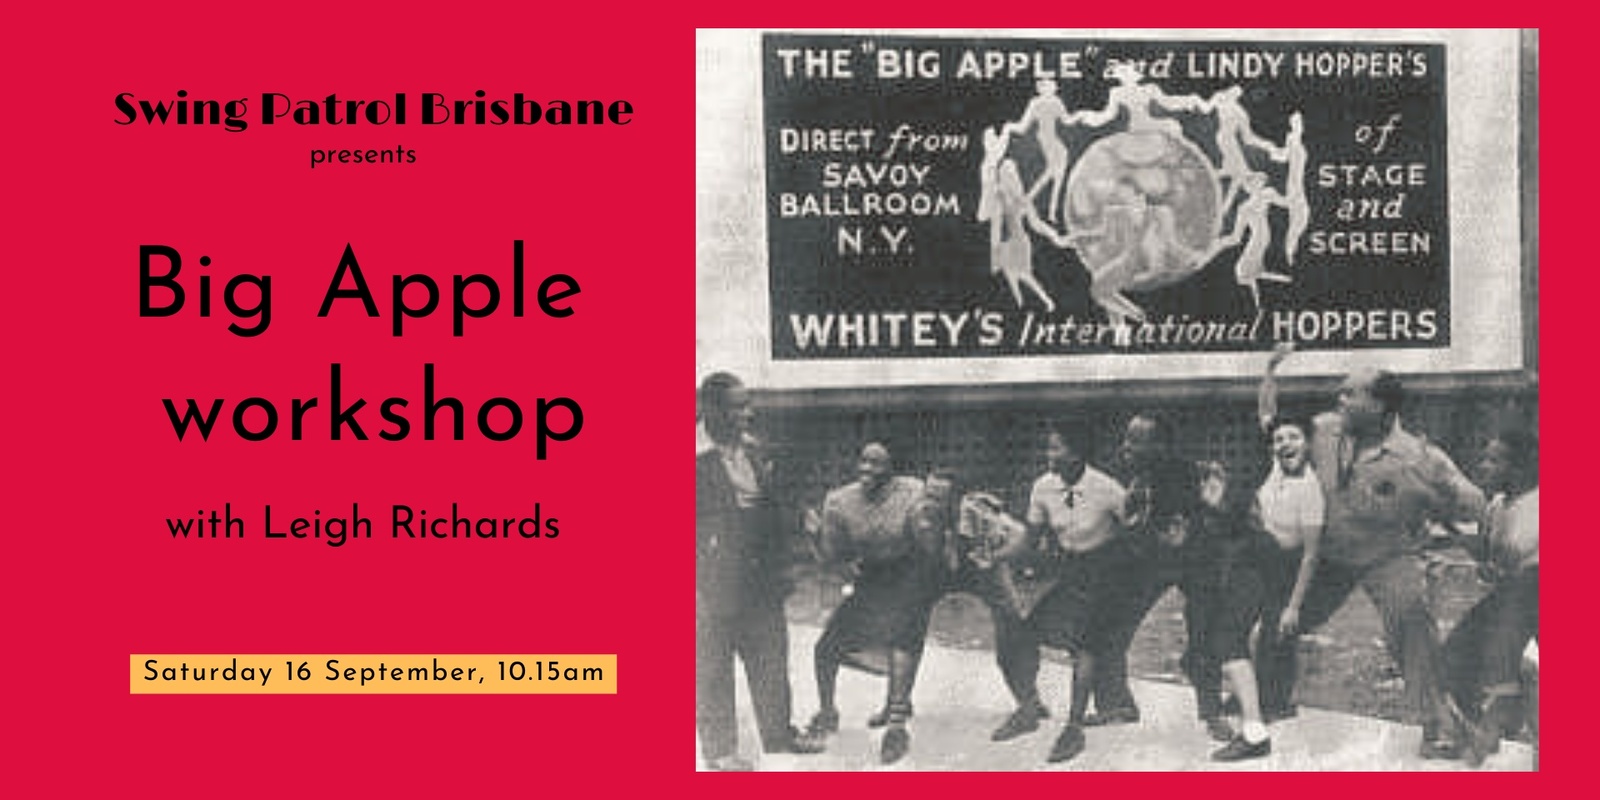 Big Apple workshop with Leigh